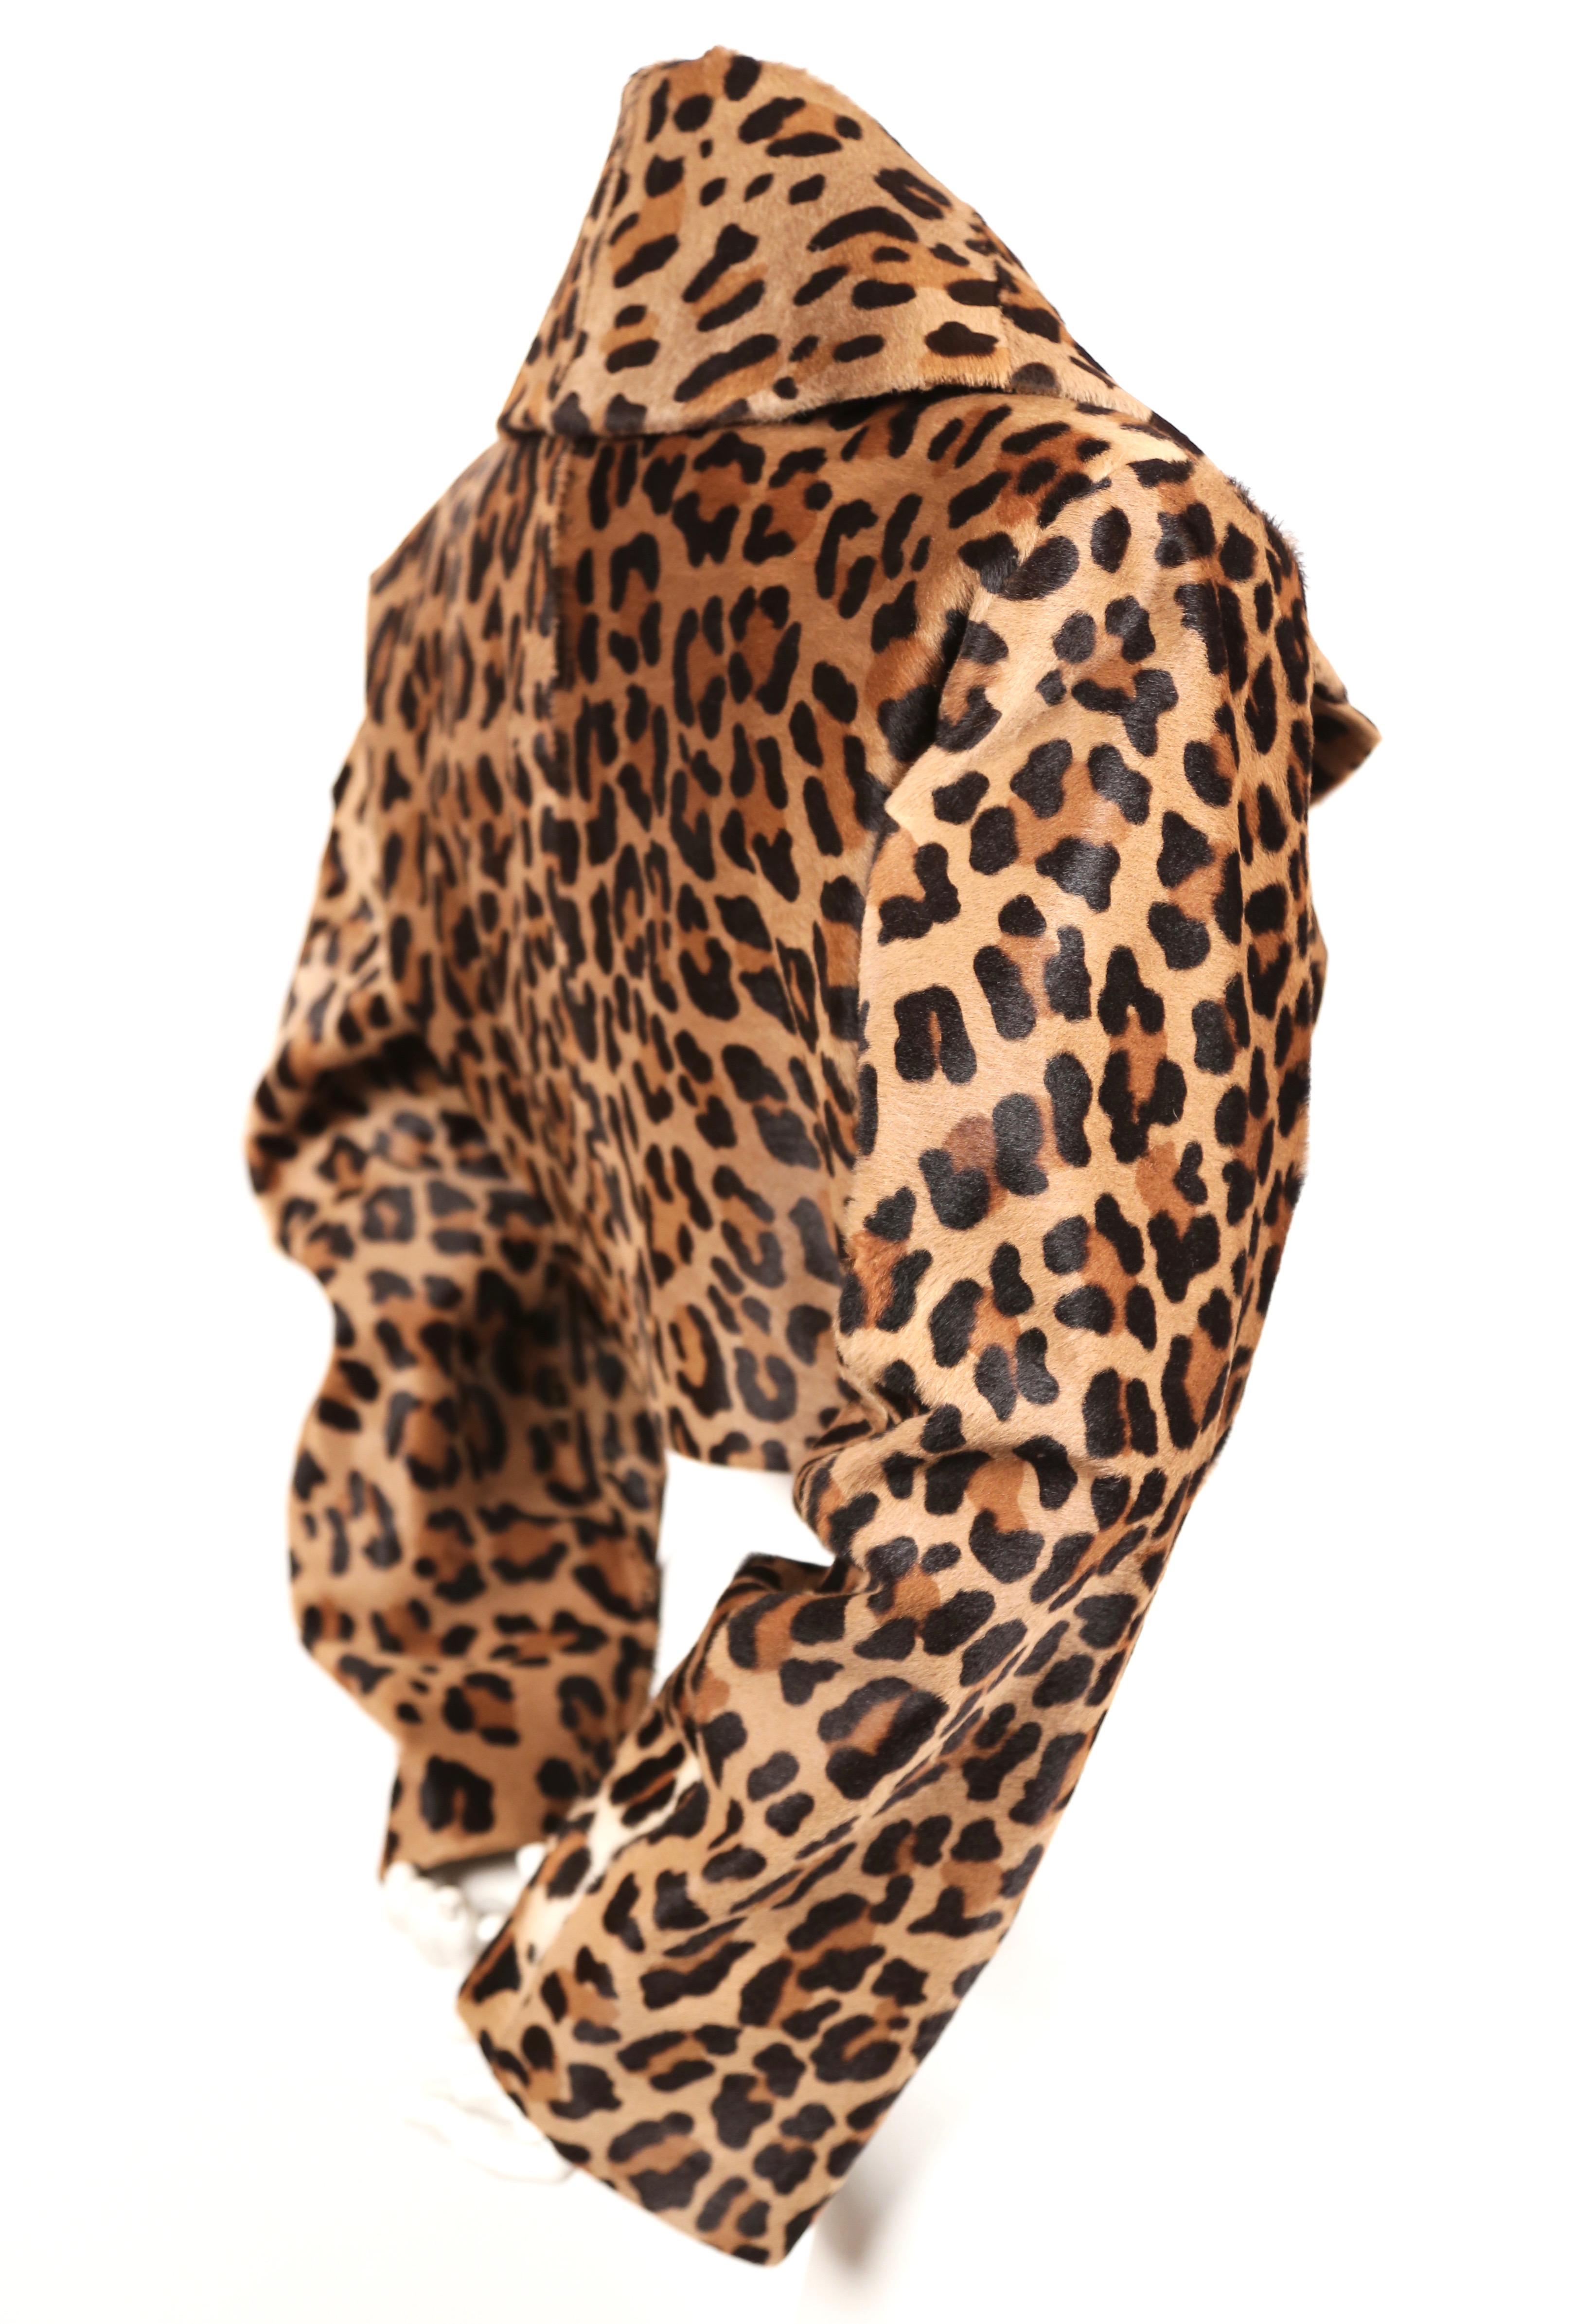 Extremely rare leopard printed calf fur jacket with decorative black frog closure designed by Azzedine Alaia dating to fall of 1991 exactly as seen on the runway. Labeled a French size 40 although there is some flexibility due to the cut.